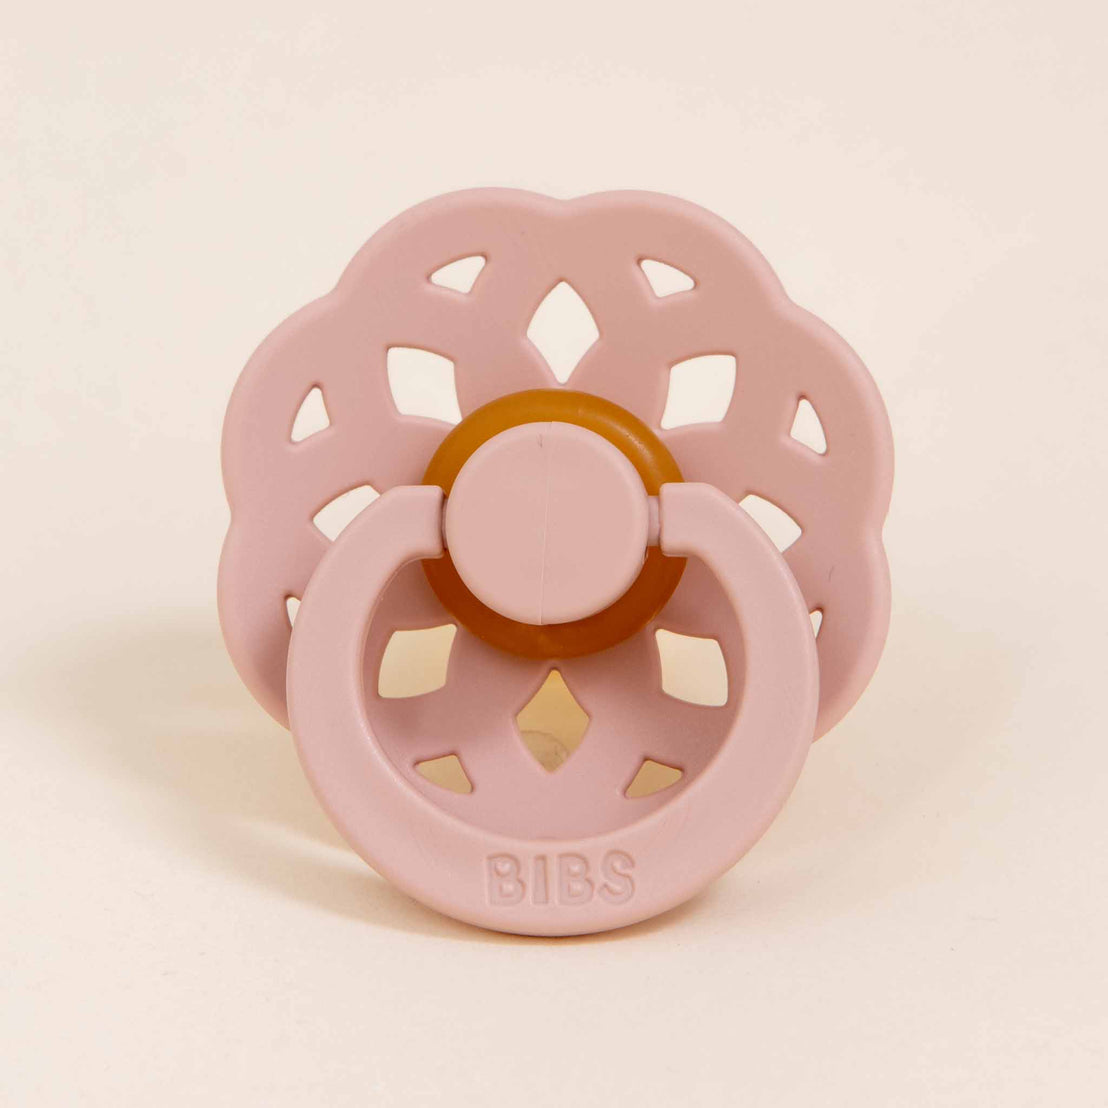 A light pink Isabella Pacifier Set with a vintage ornate pattern and a circular handle, labeled "bibs" on a beige background.